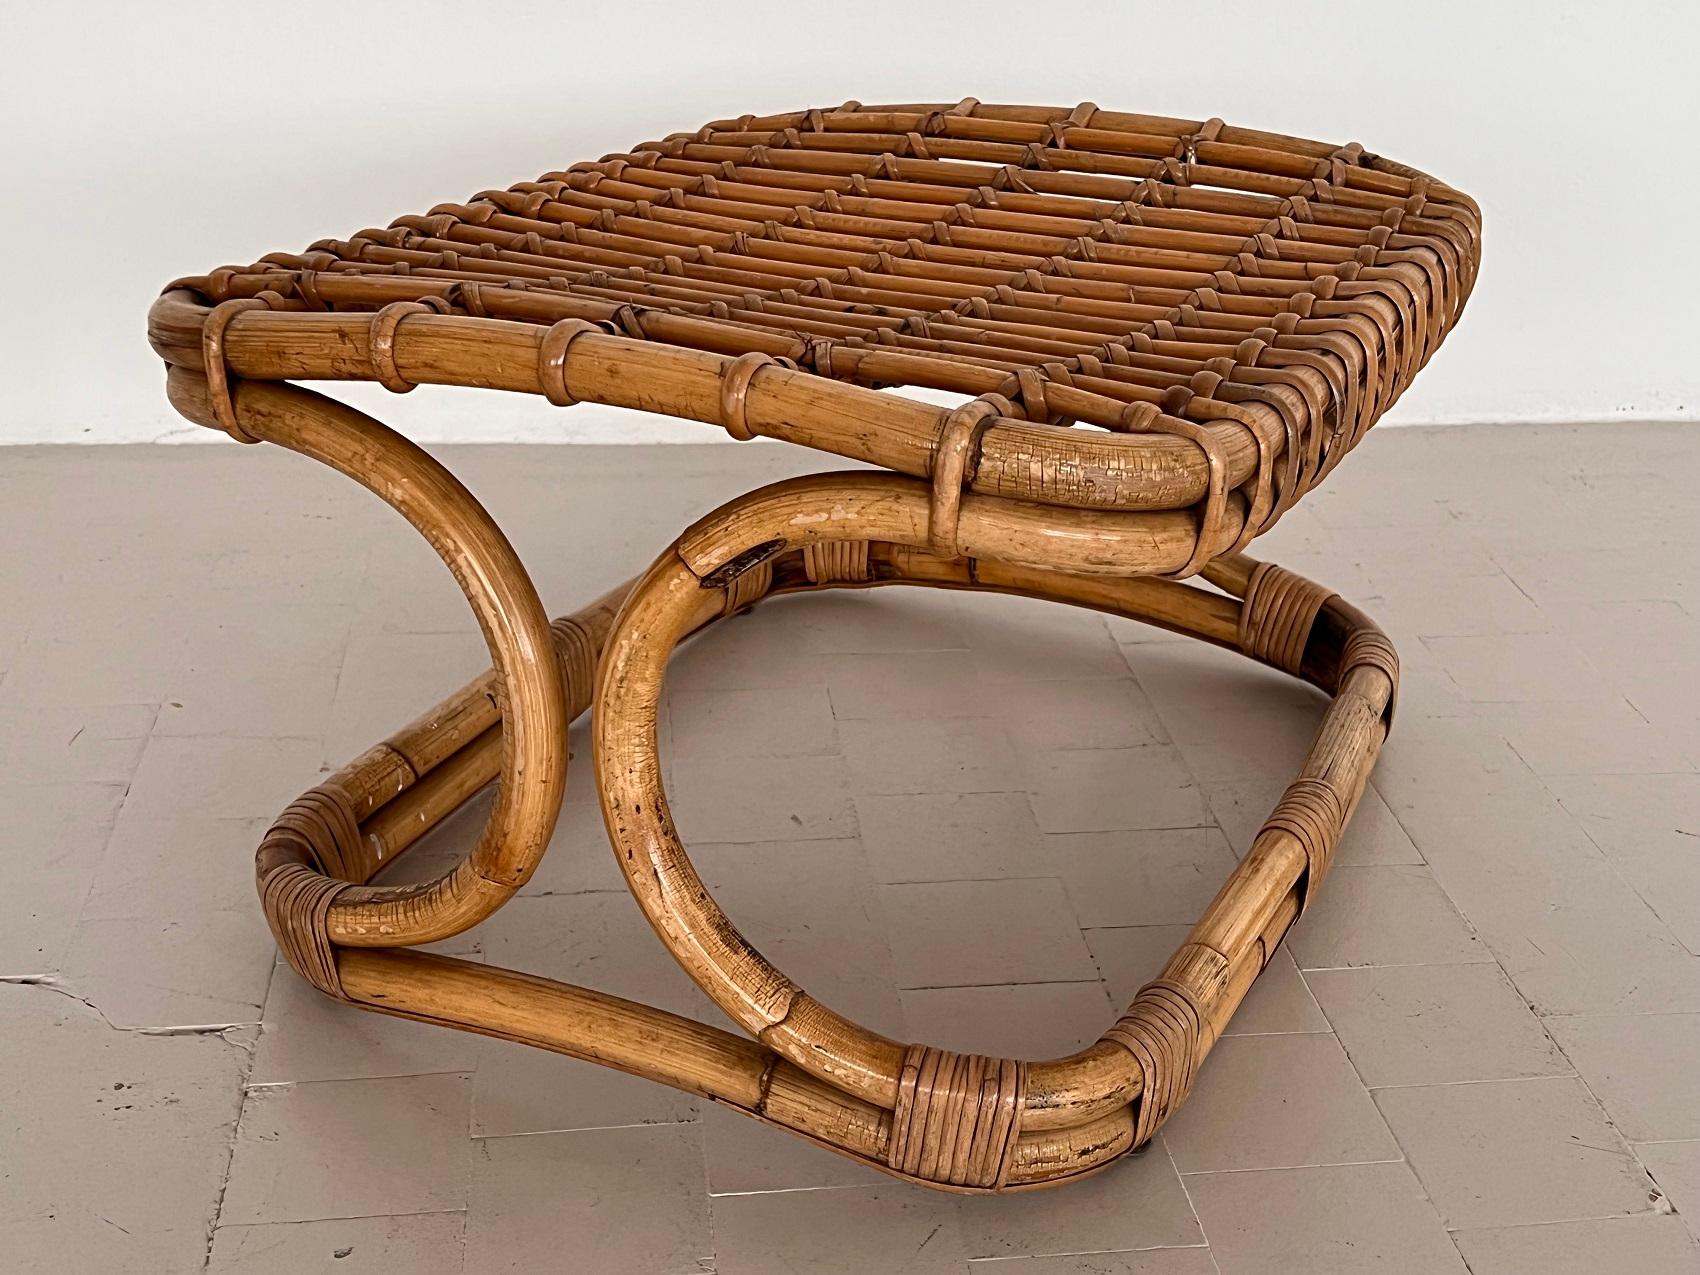 Italian Midcentury Stool in Bamboo Rattan by Tito Agnoli, 1960s For Sale 4